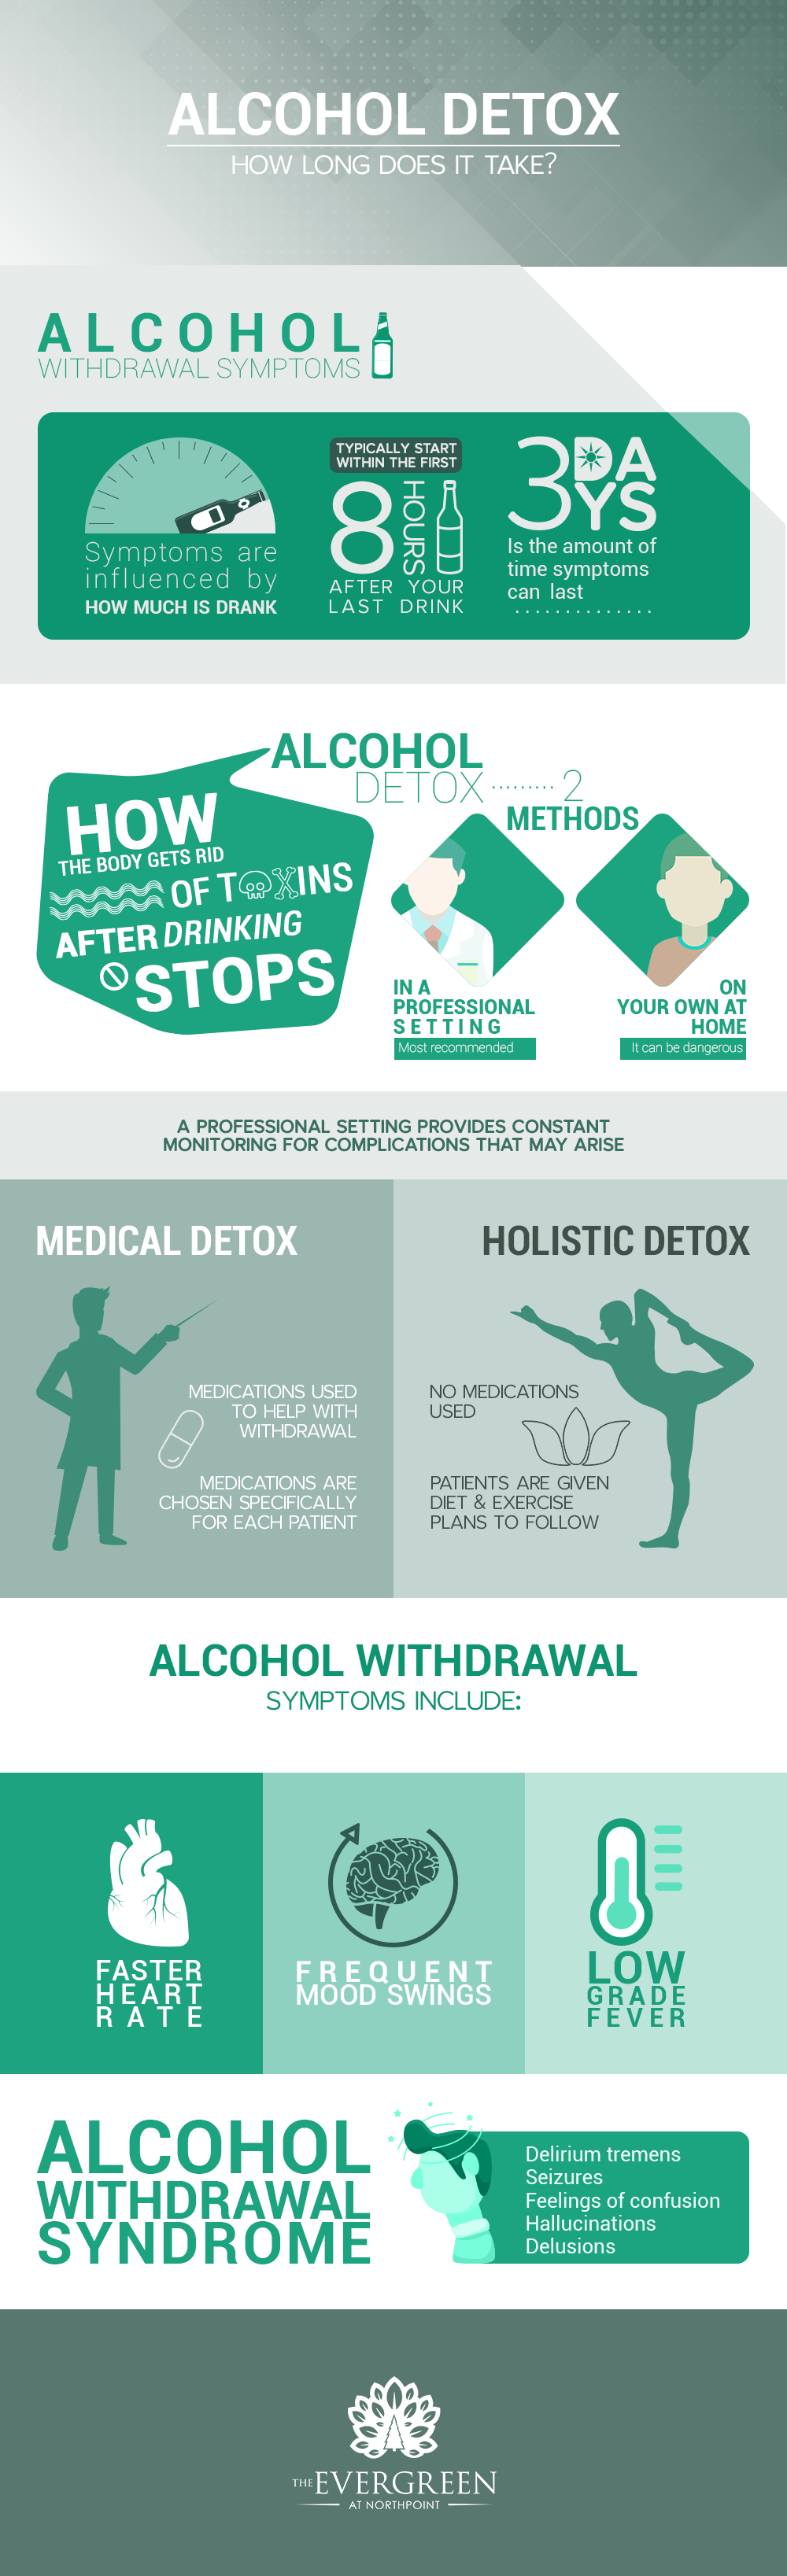 How Long Does Alcohol Detox Take Infographic